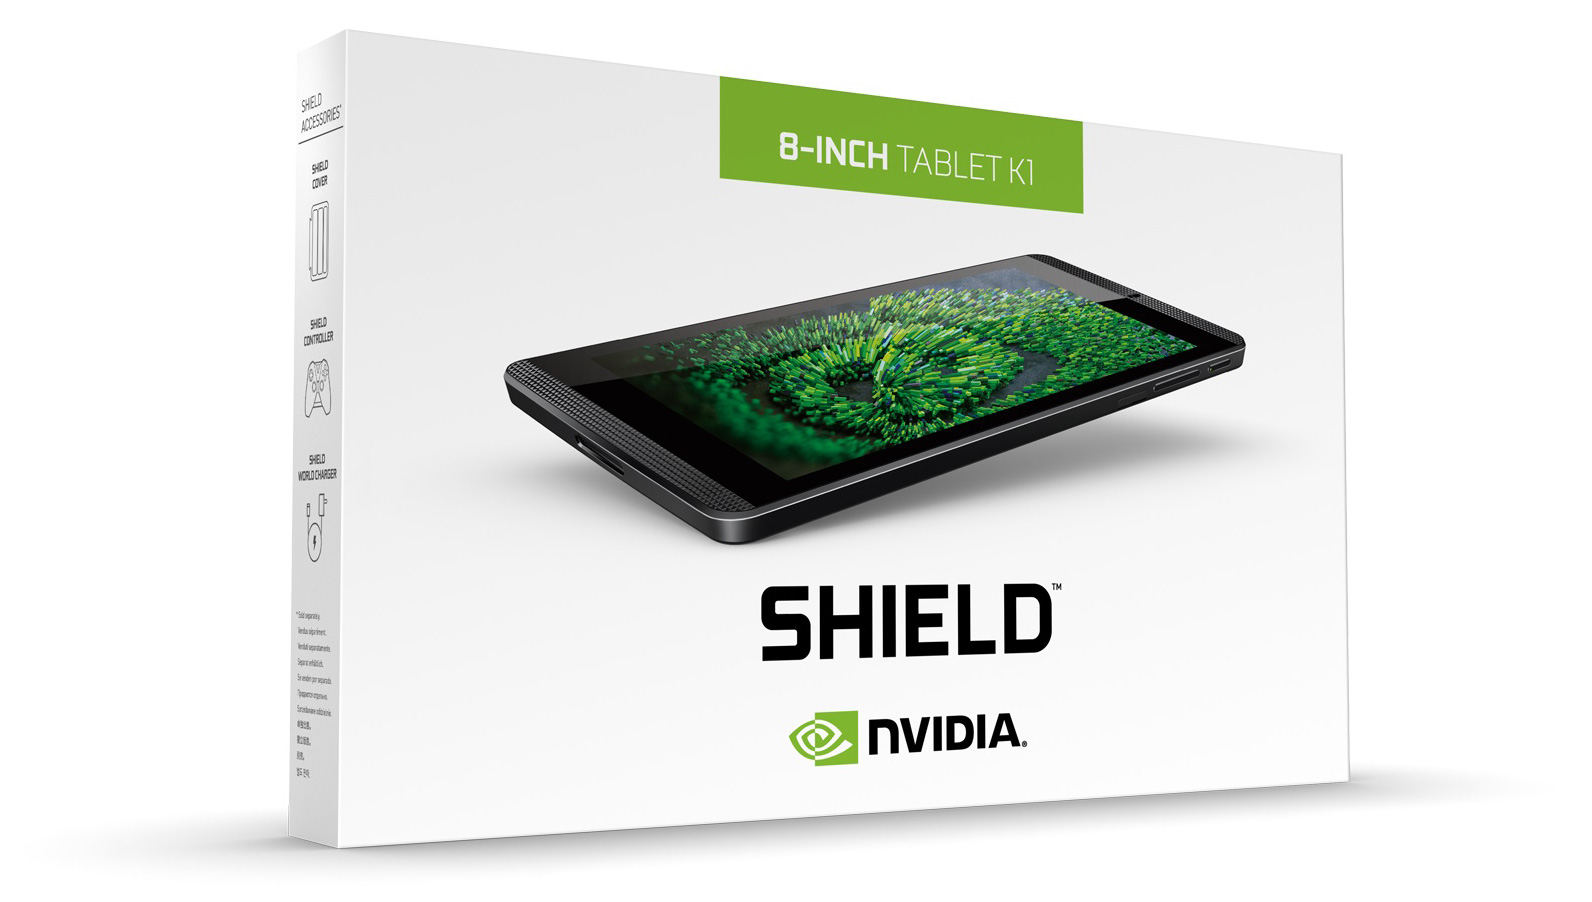 Verwacht het Pekkadillo Overname NVIDIA Re-launches the SHIELD Tablet as the SHIELD Tablet K1